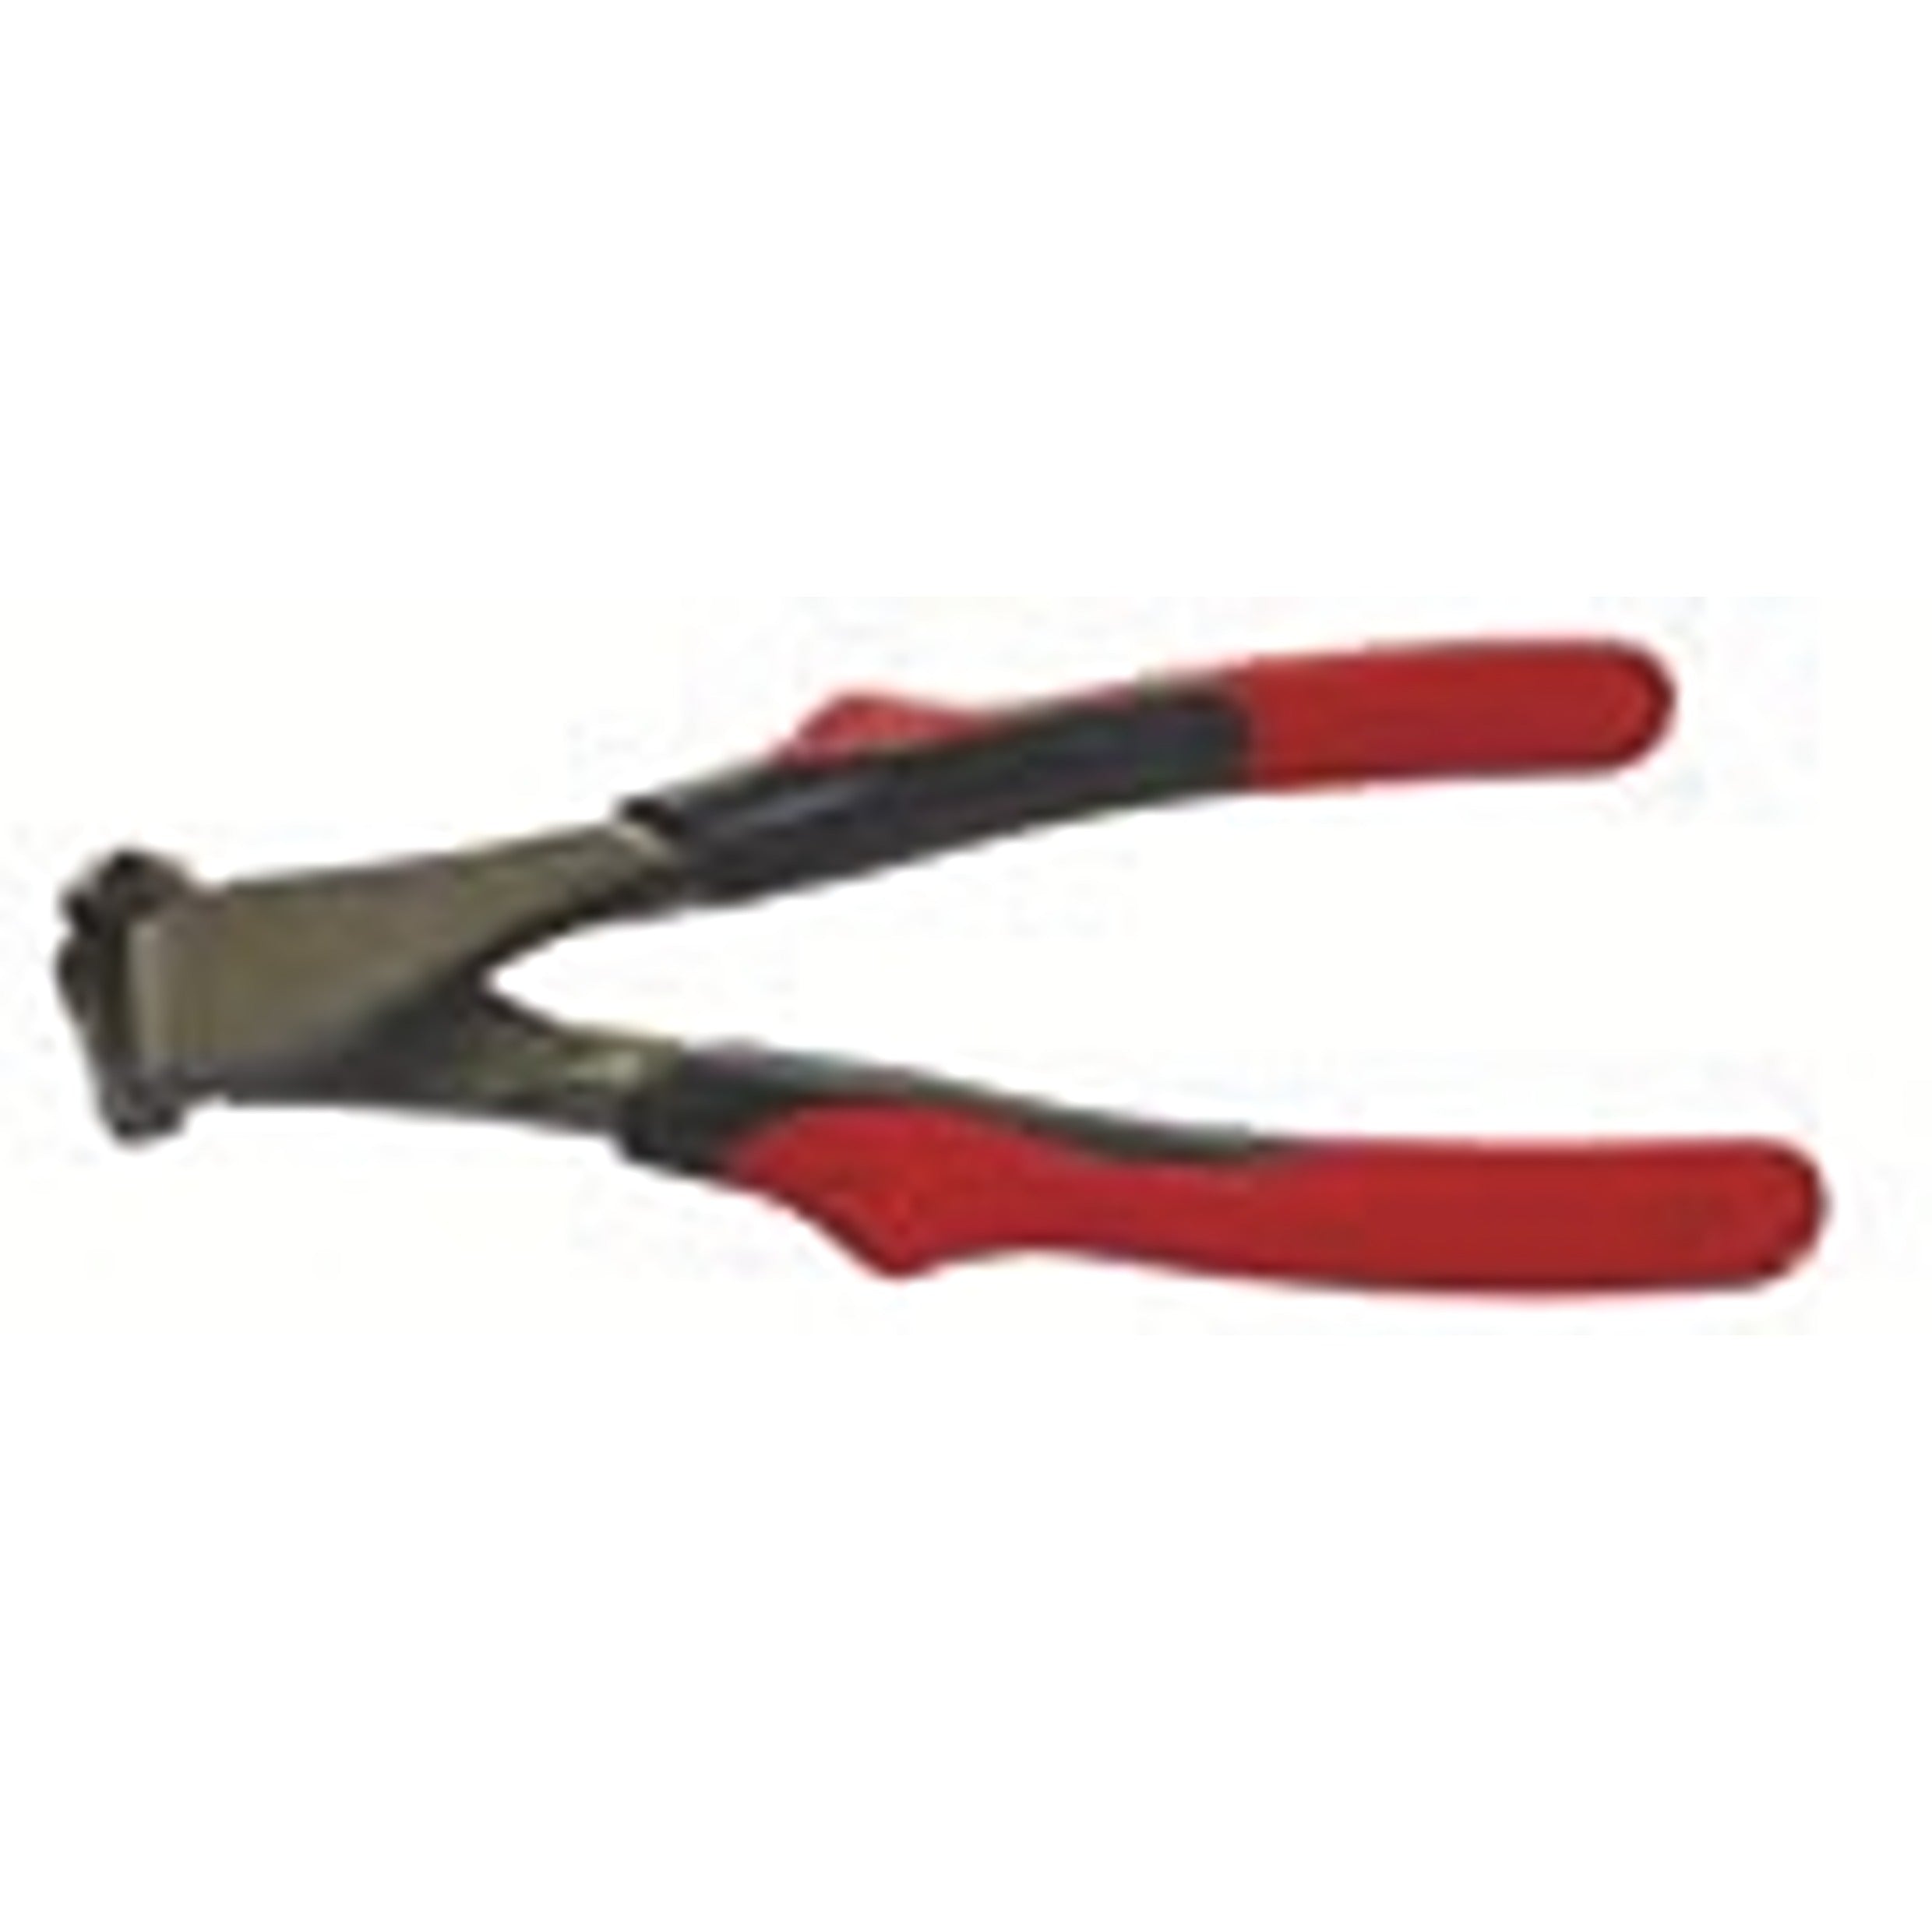 BRITOOL PG601 End Cutter 200 mm (BRITOOL) - Premium End Cutter from BRITOOL - Shop now at Yew Aik.